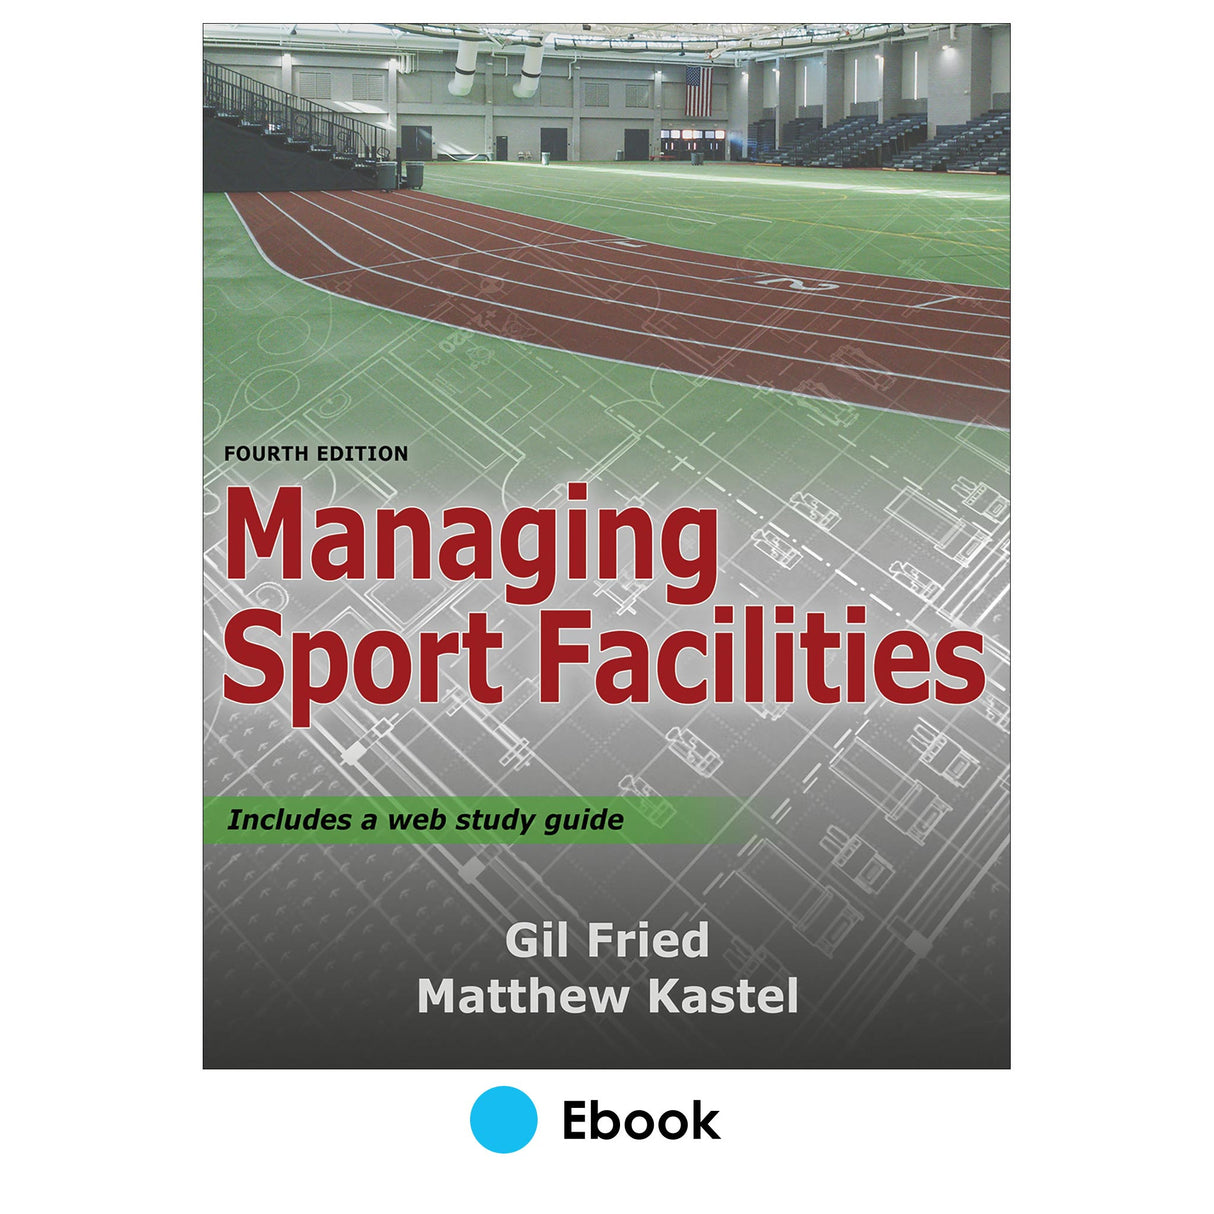 Managing Sport Facilities 4th Edition epub With Web Study Guide